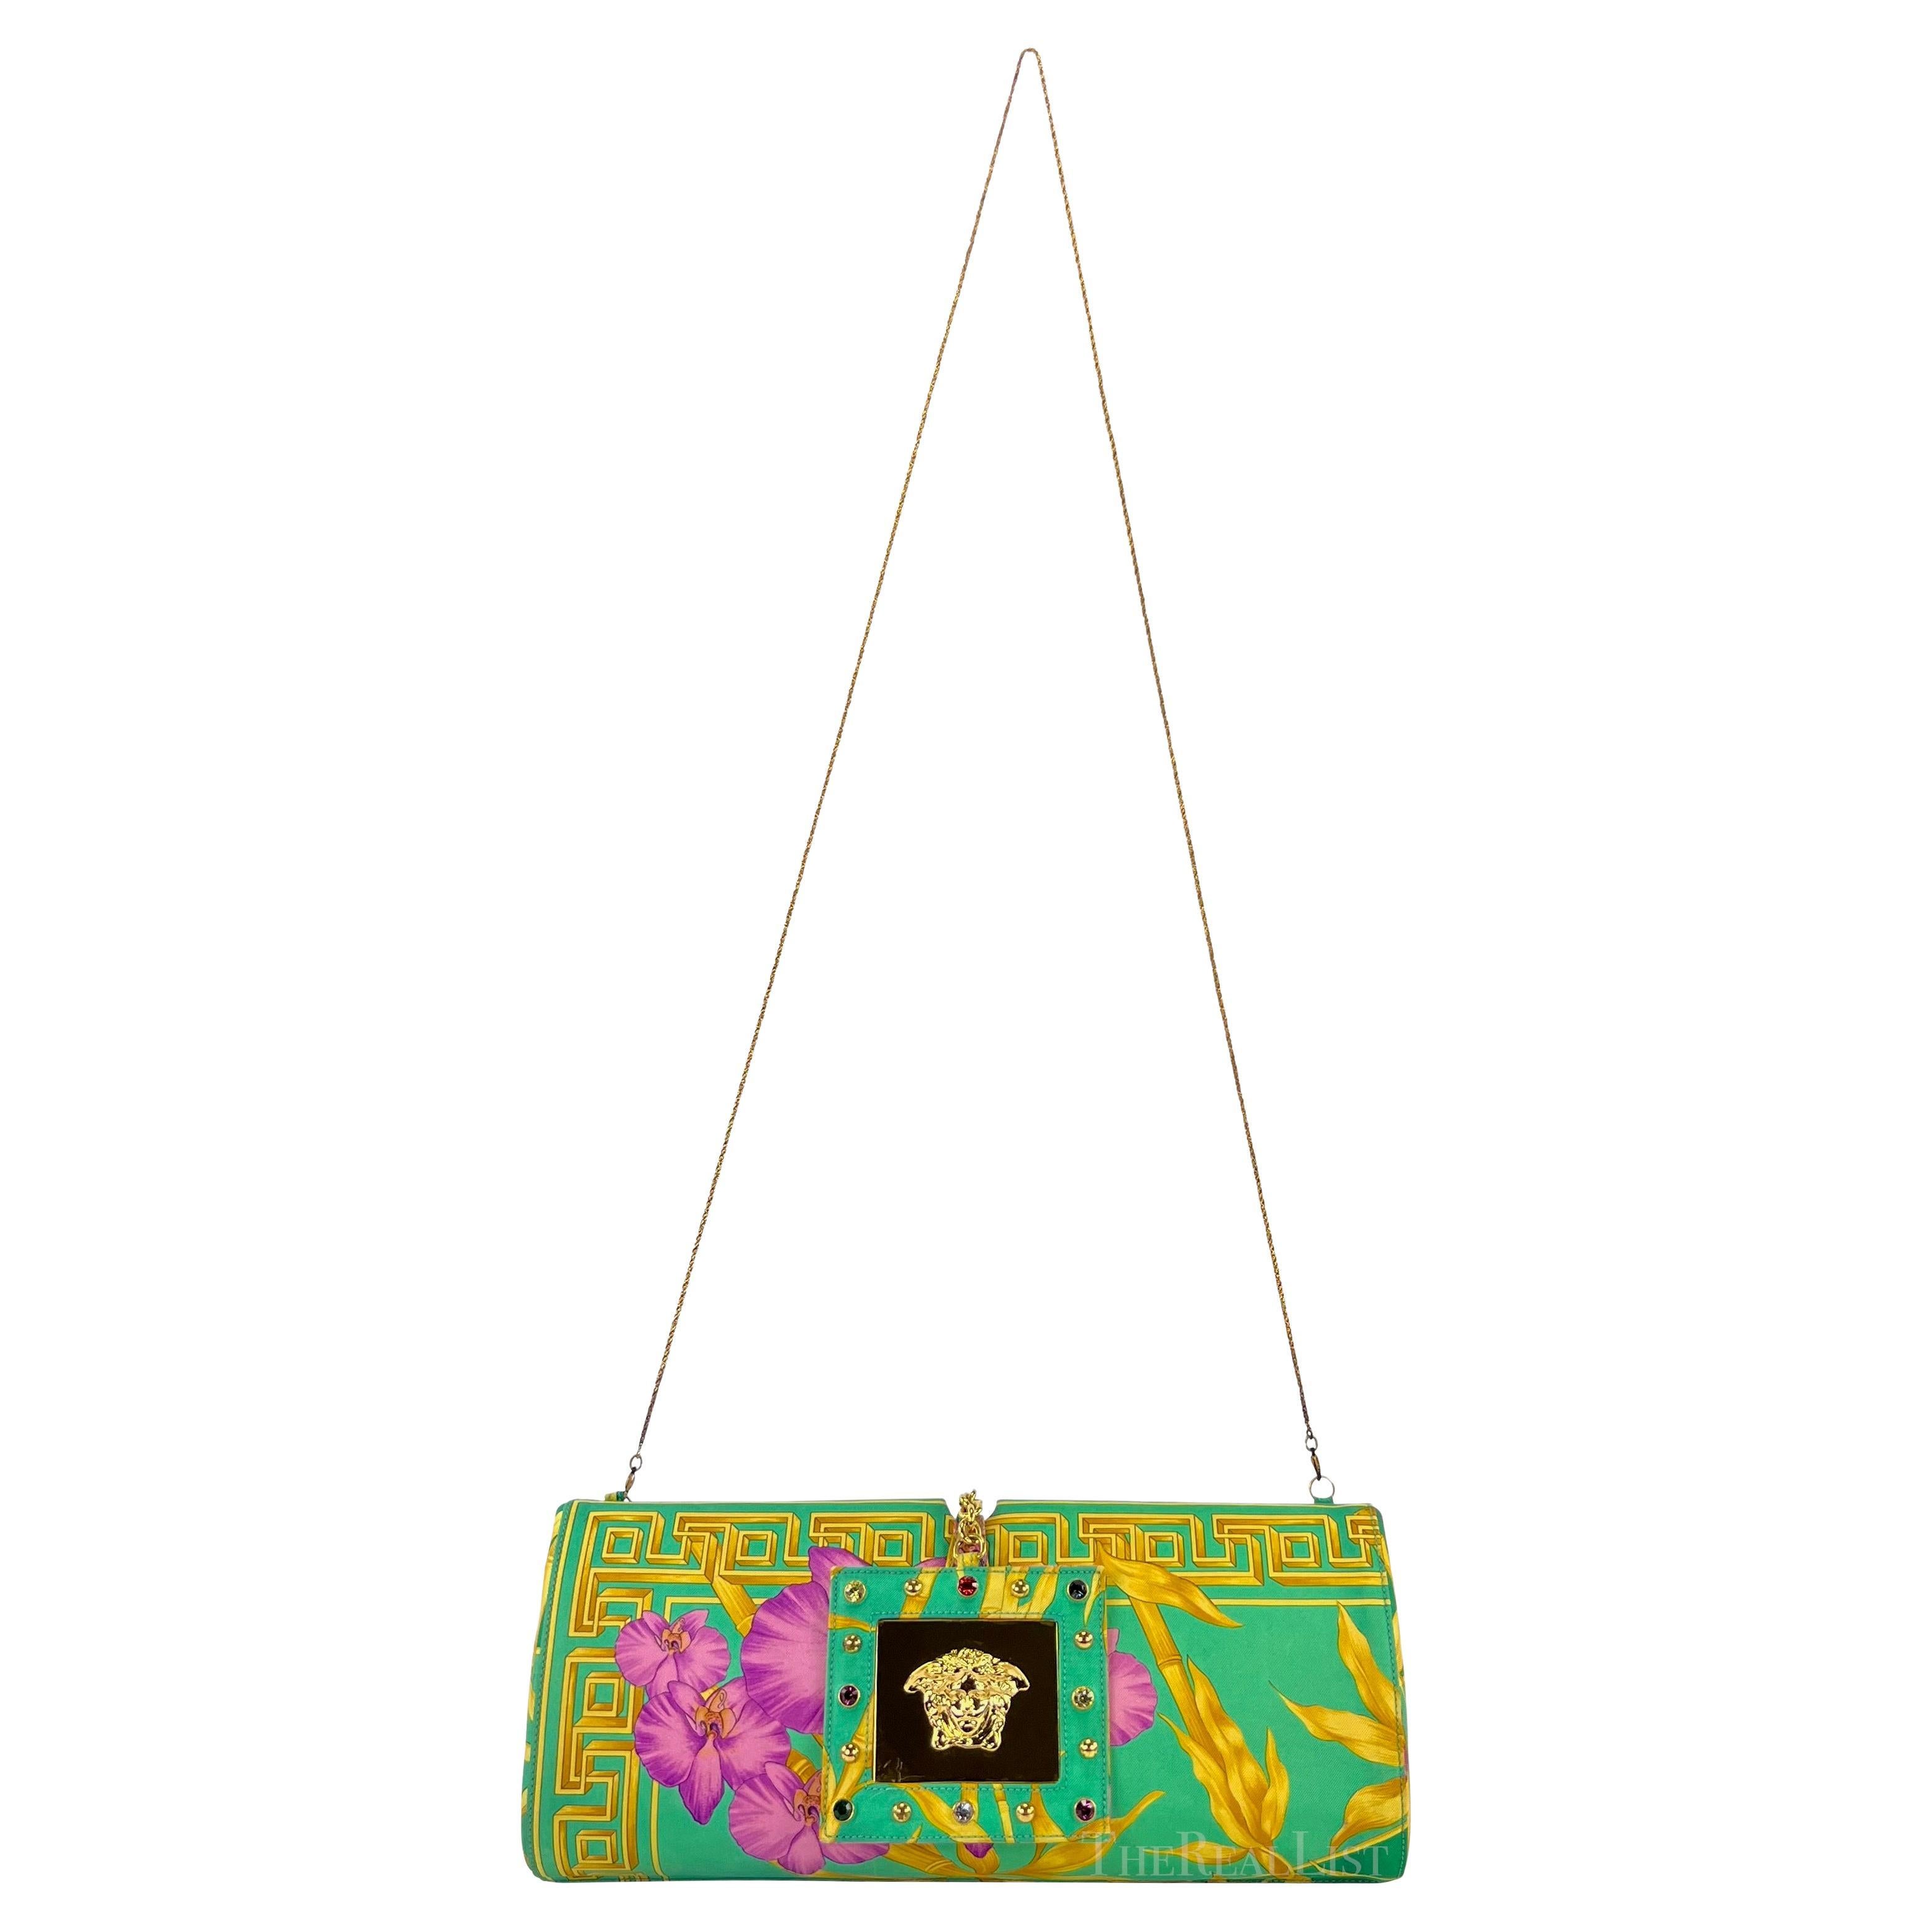 S/S 2000 Gianni Versace by Donatella Green Floral Convertible Runway Clutch For Sale 2